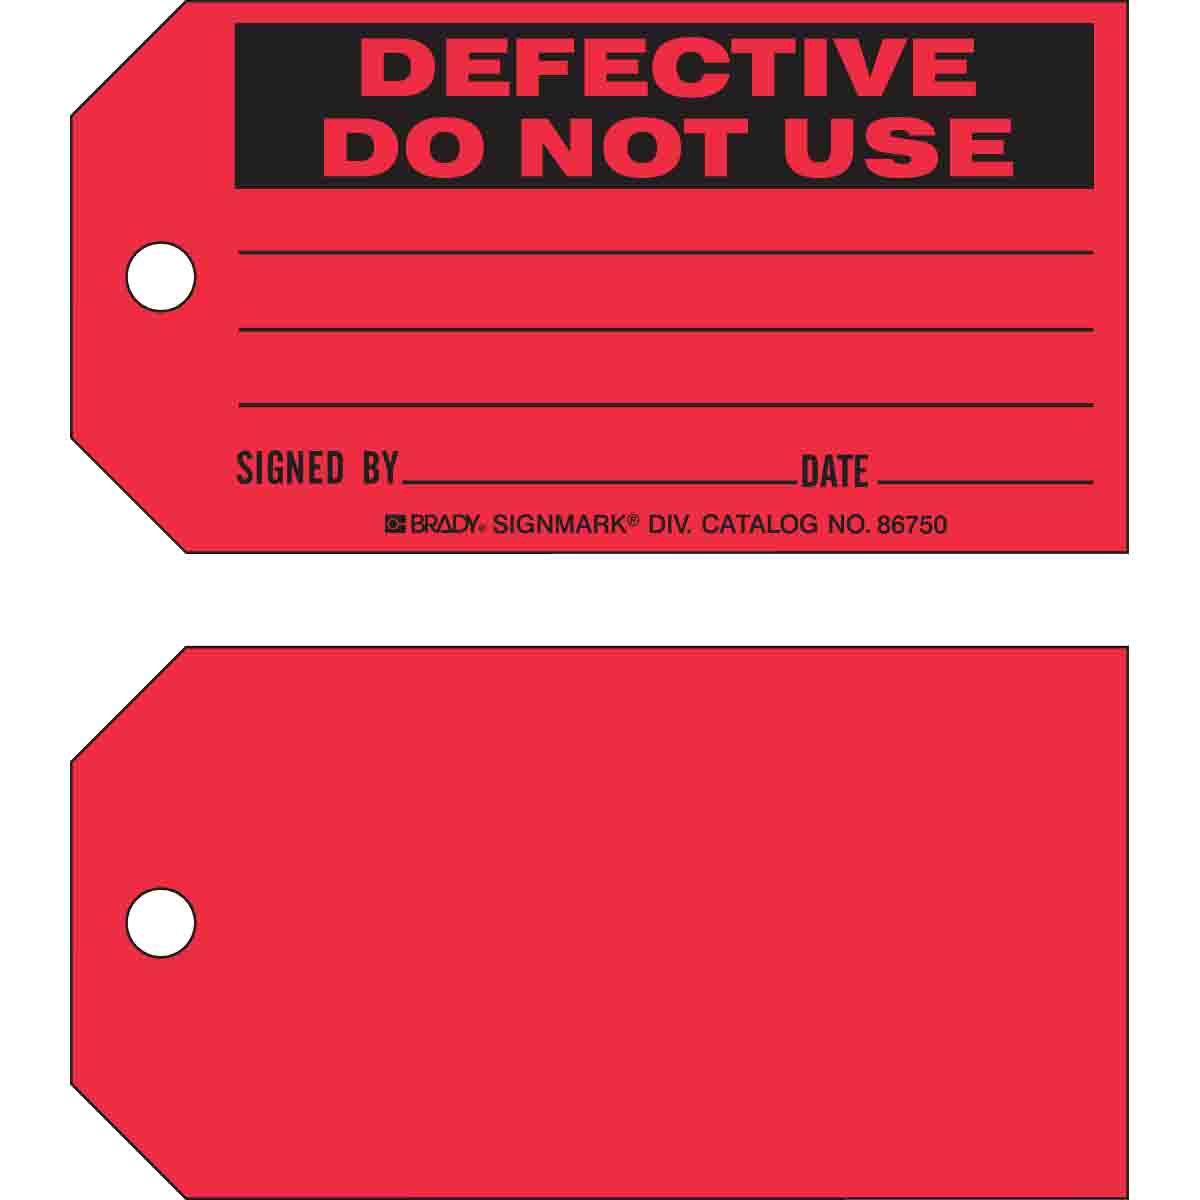 "DEFECTIVE DO NOT USE BY" RED STATUS TAGS